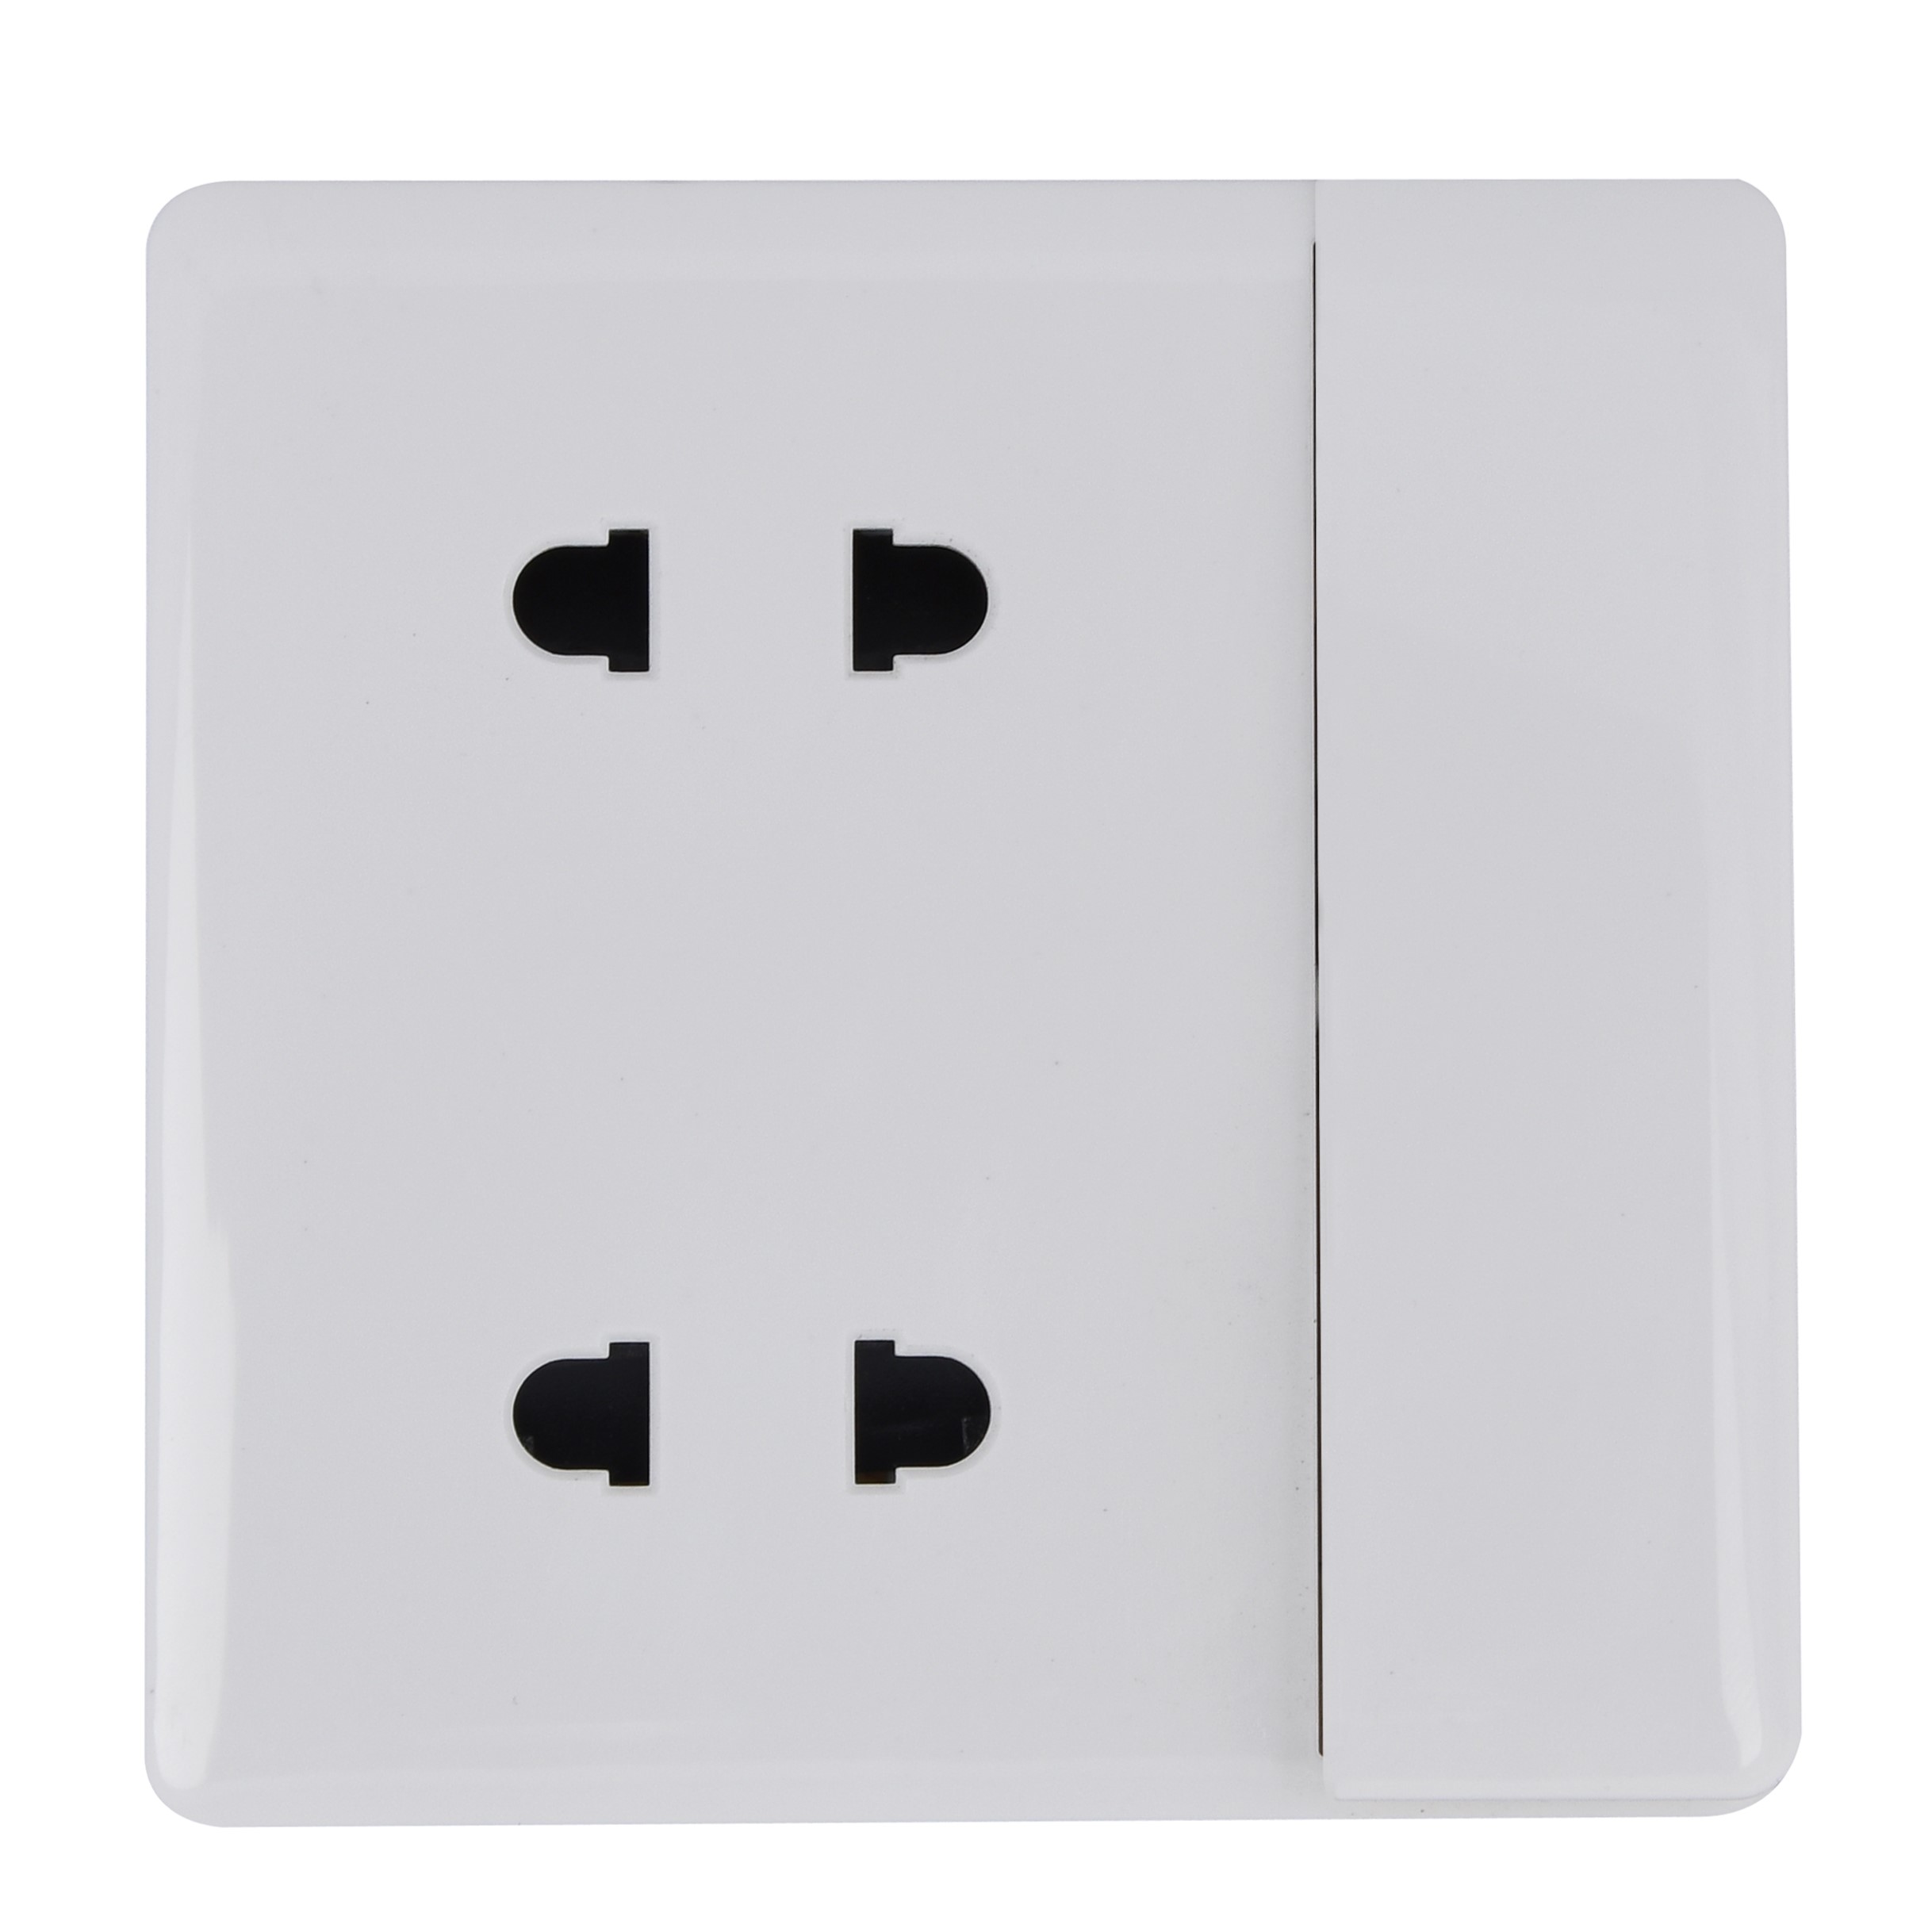 Square one-open, two-position four-pin socket